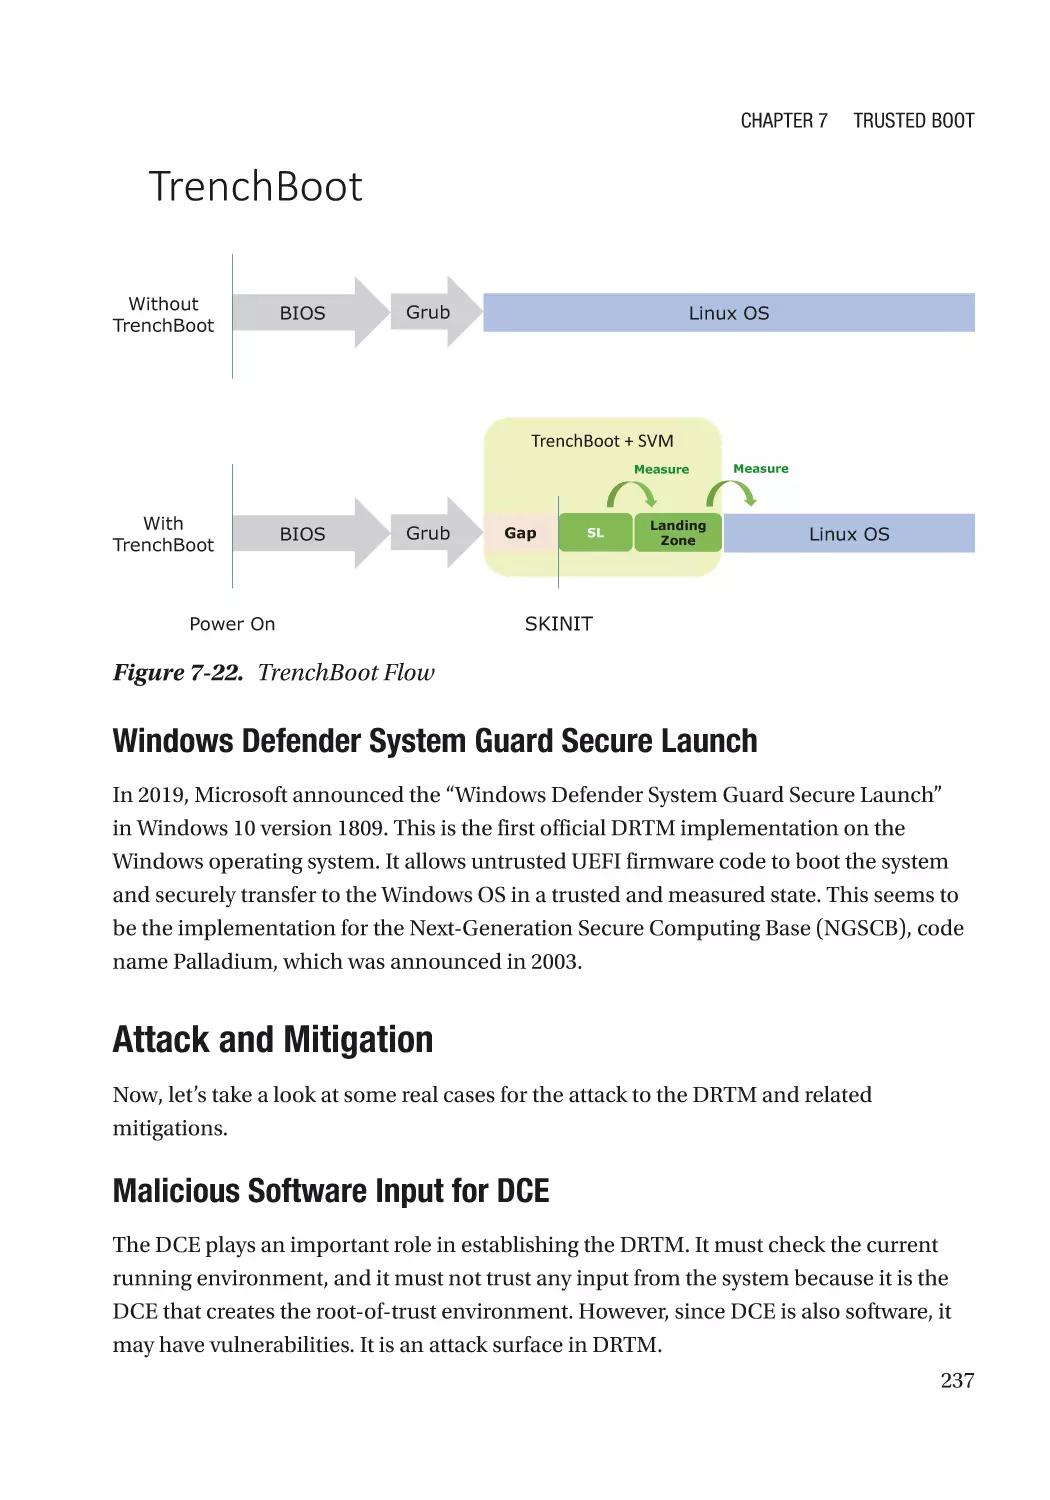 Windows Defender System Guard Secure Launch
Attack and Mitigation
Malicious Software Input for DCE